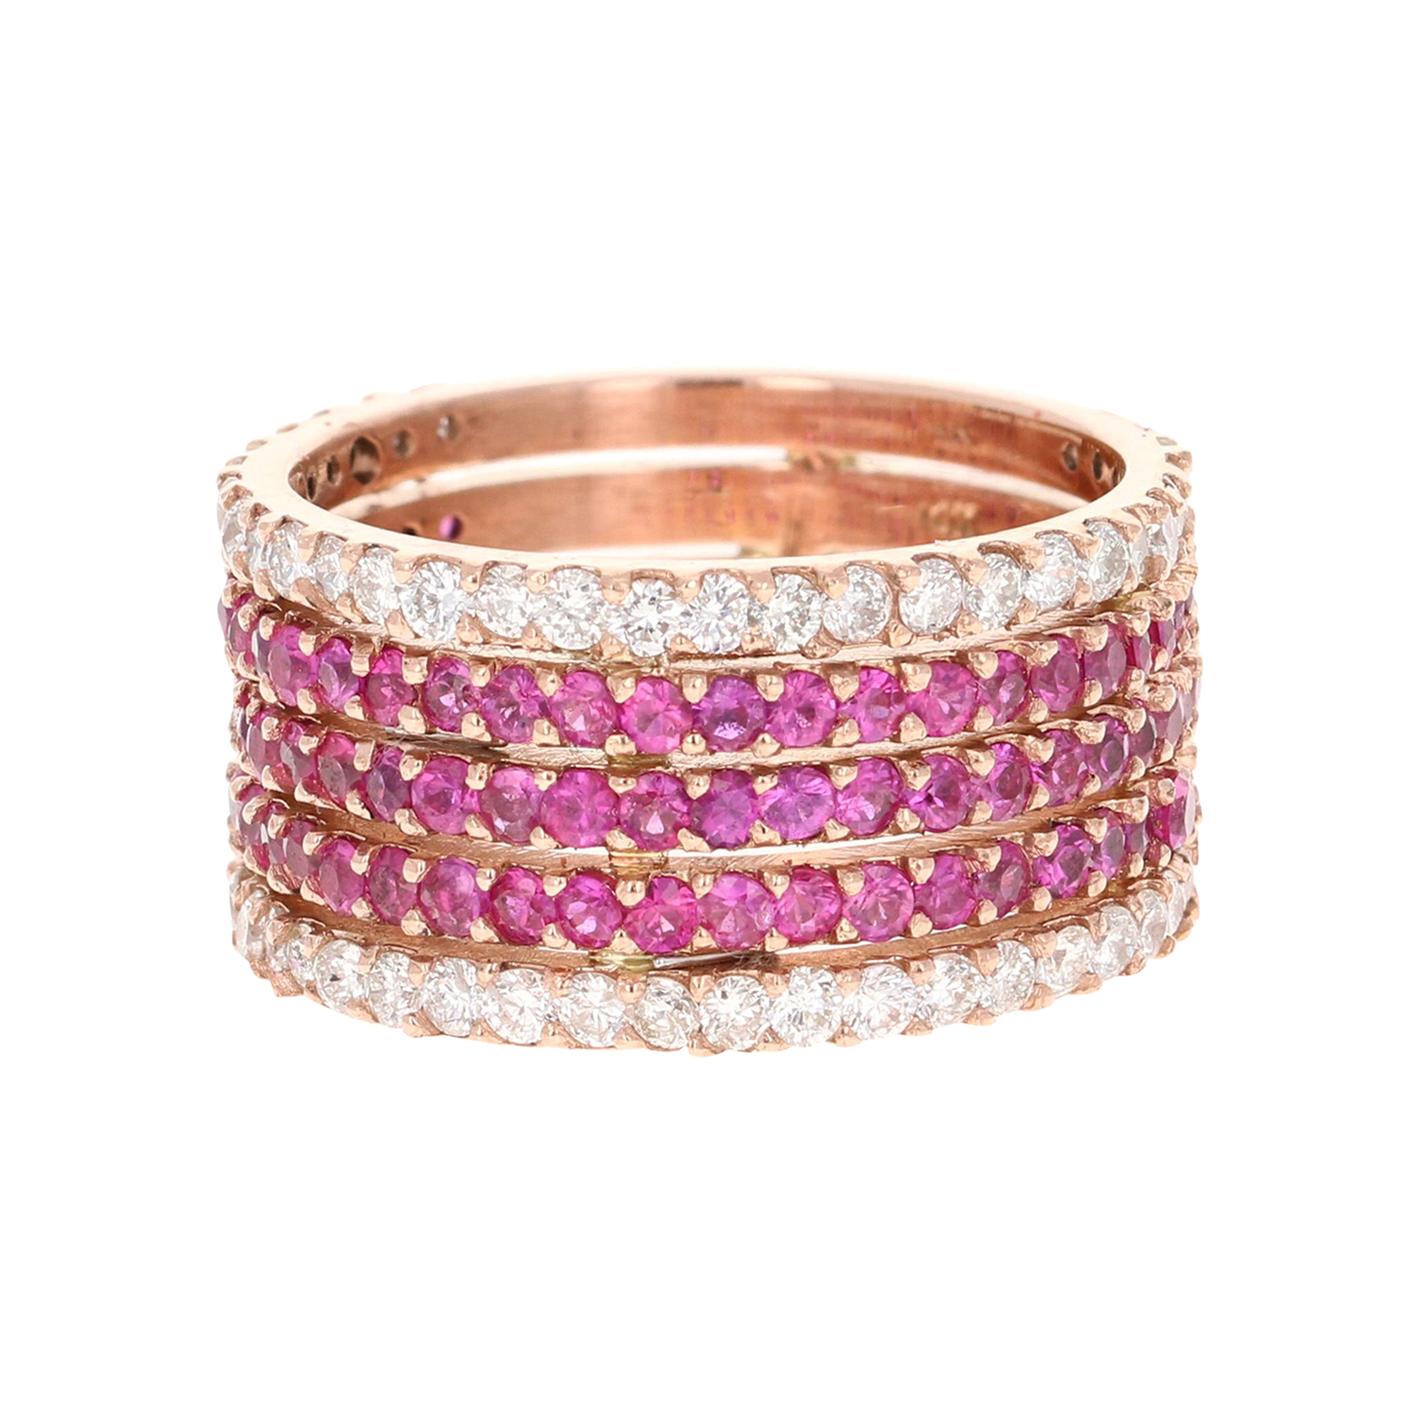 3.09 Carat Pink Sapphire and Diamond Rose Gold Cocktail Ring